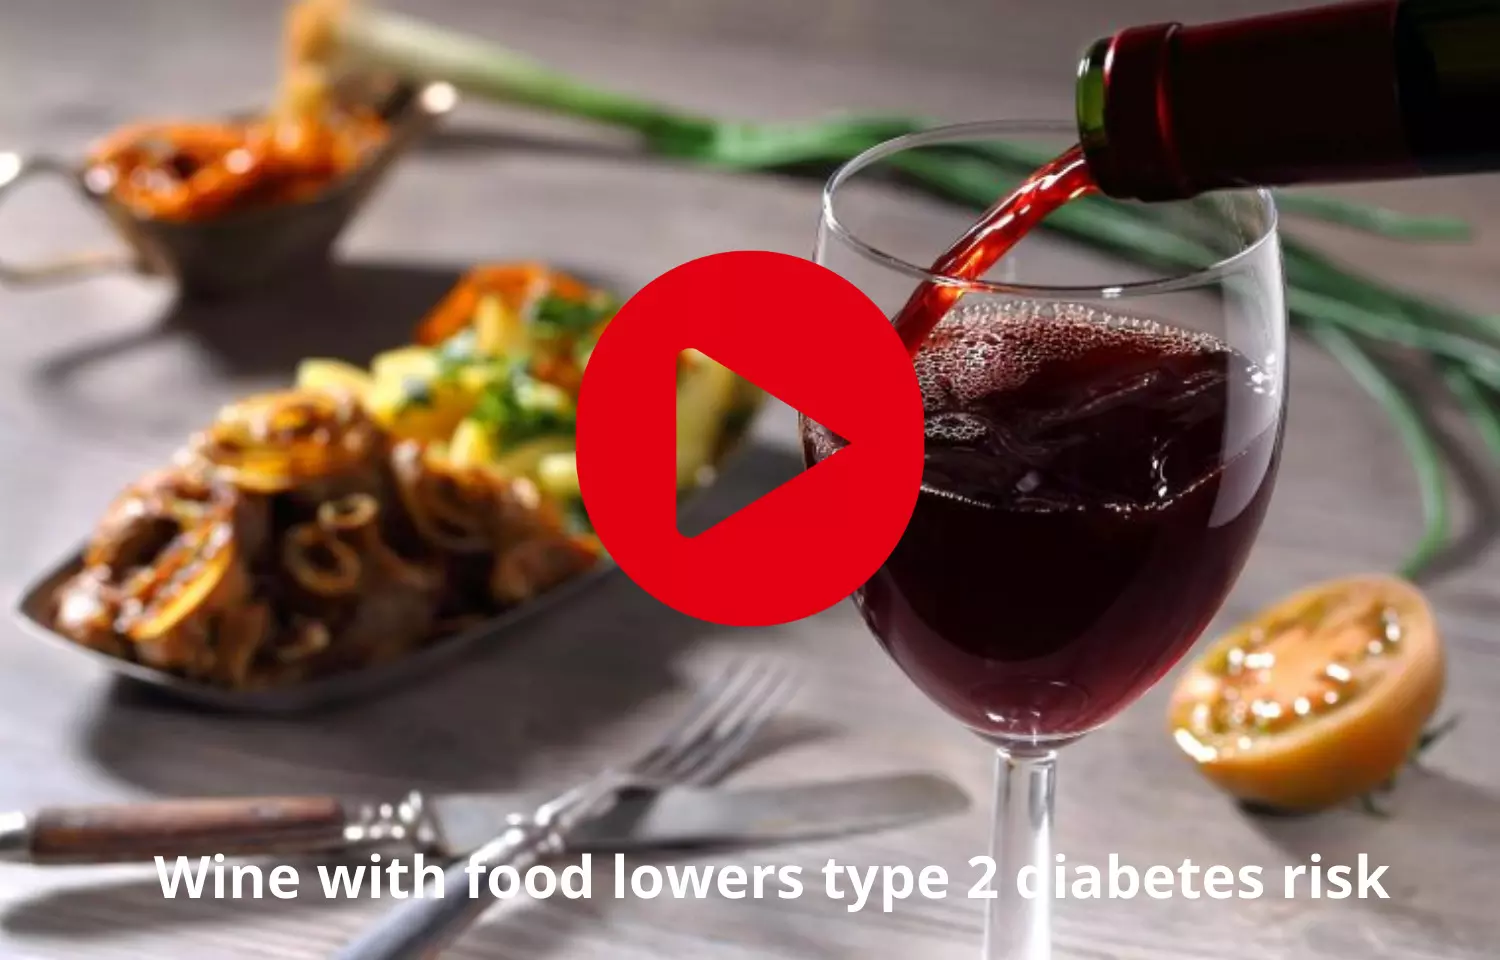 Wine consumption along with food lowers type 2 diabetes risk